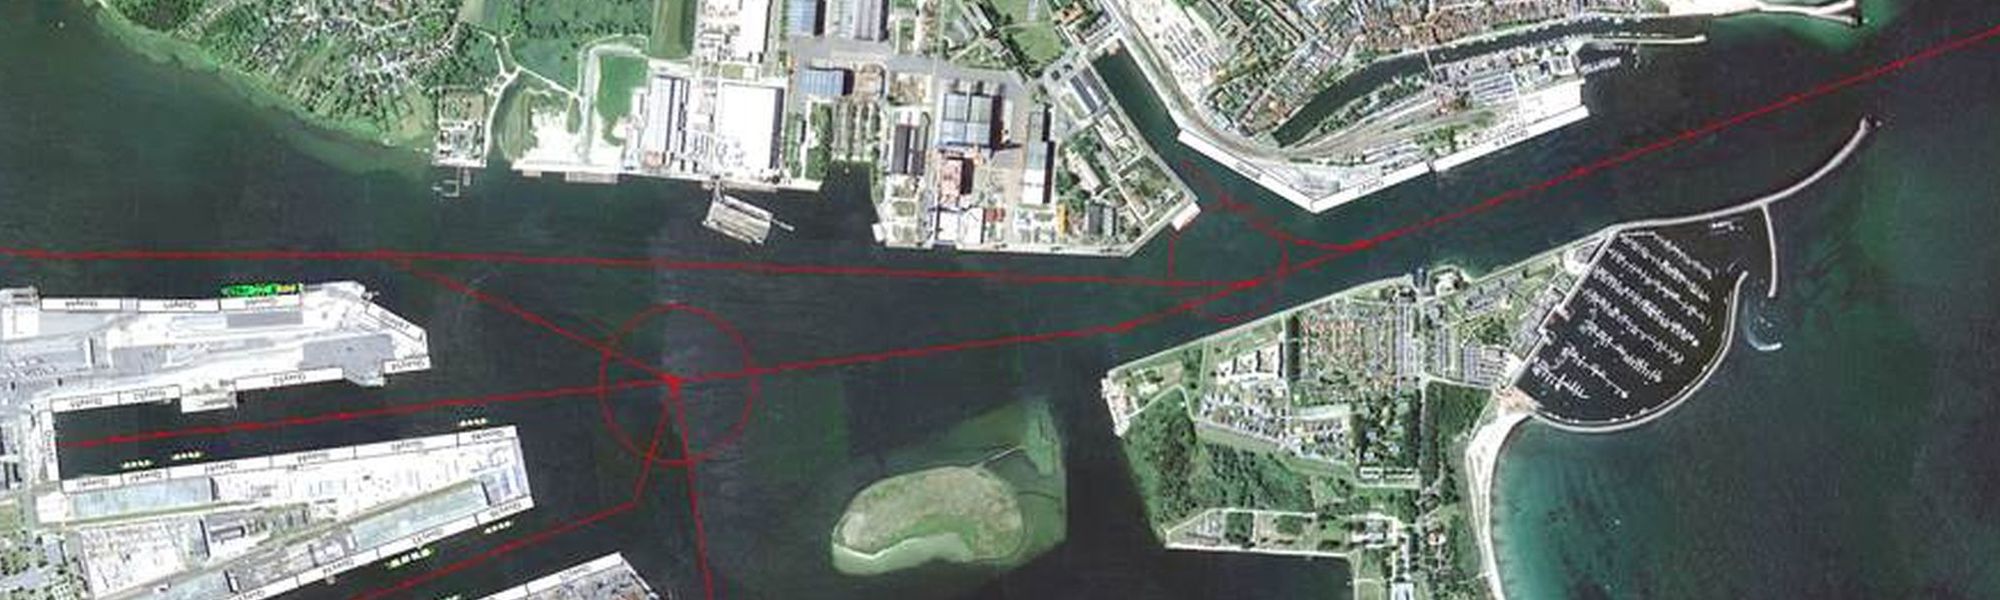 Assessing and Improving the Performance of the Approach Channel for the Port of Rostock